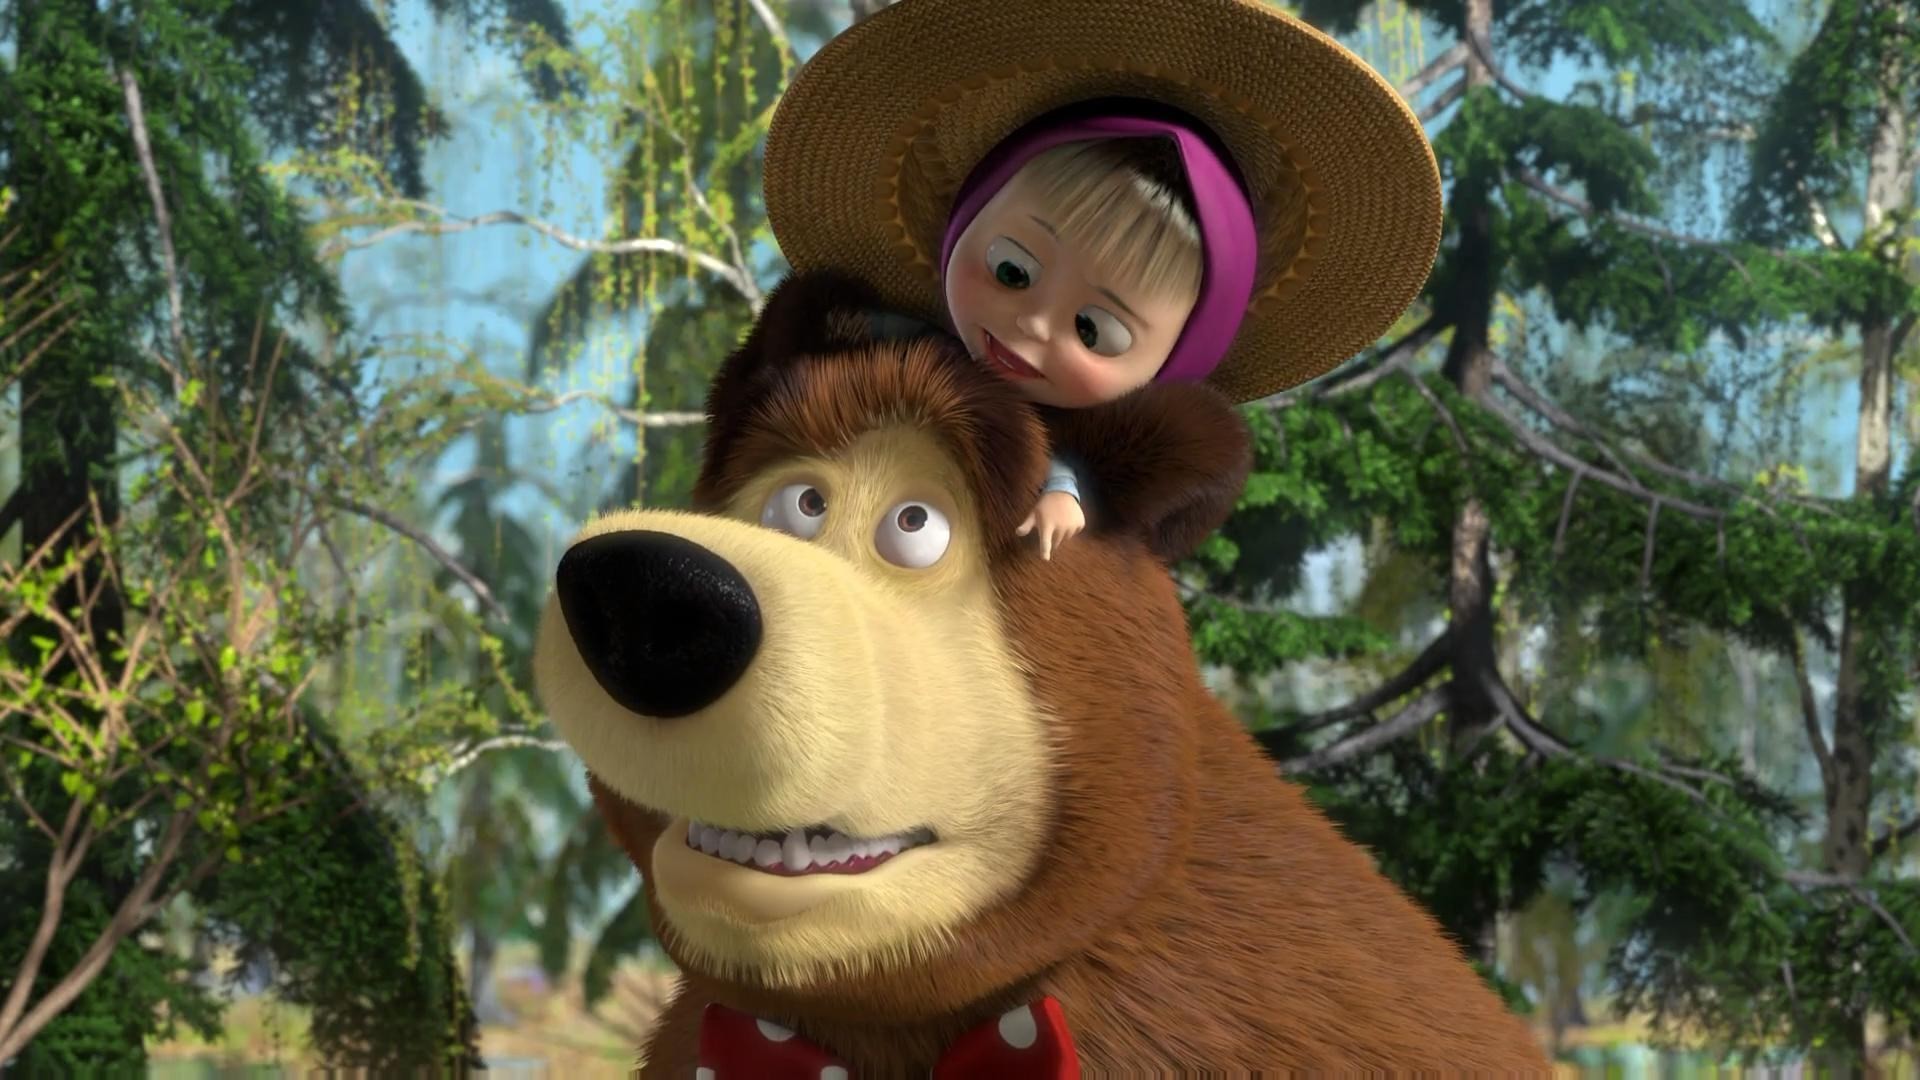 1920x1080 wallpapers free masha and the bear